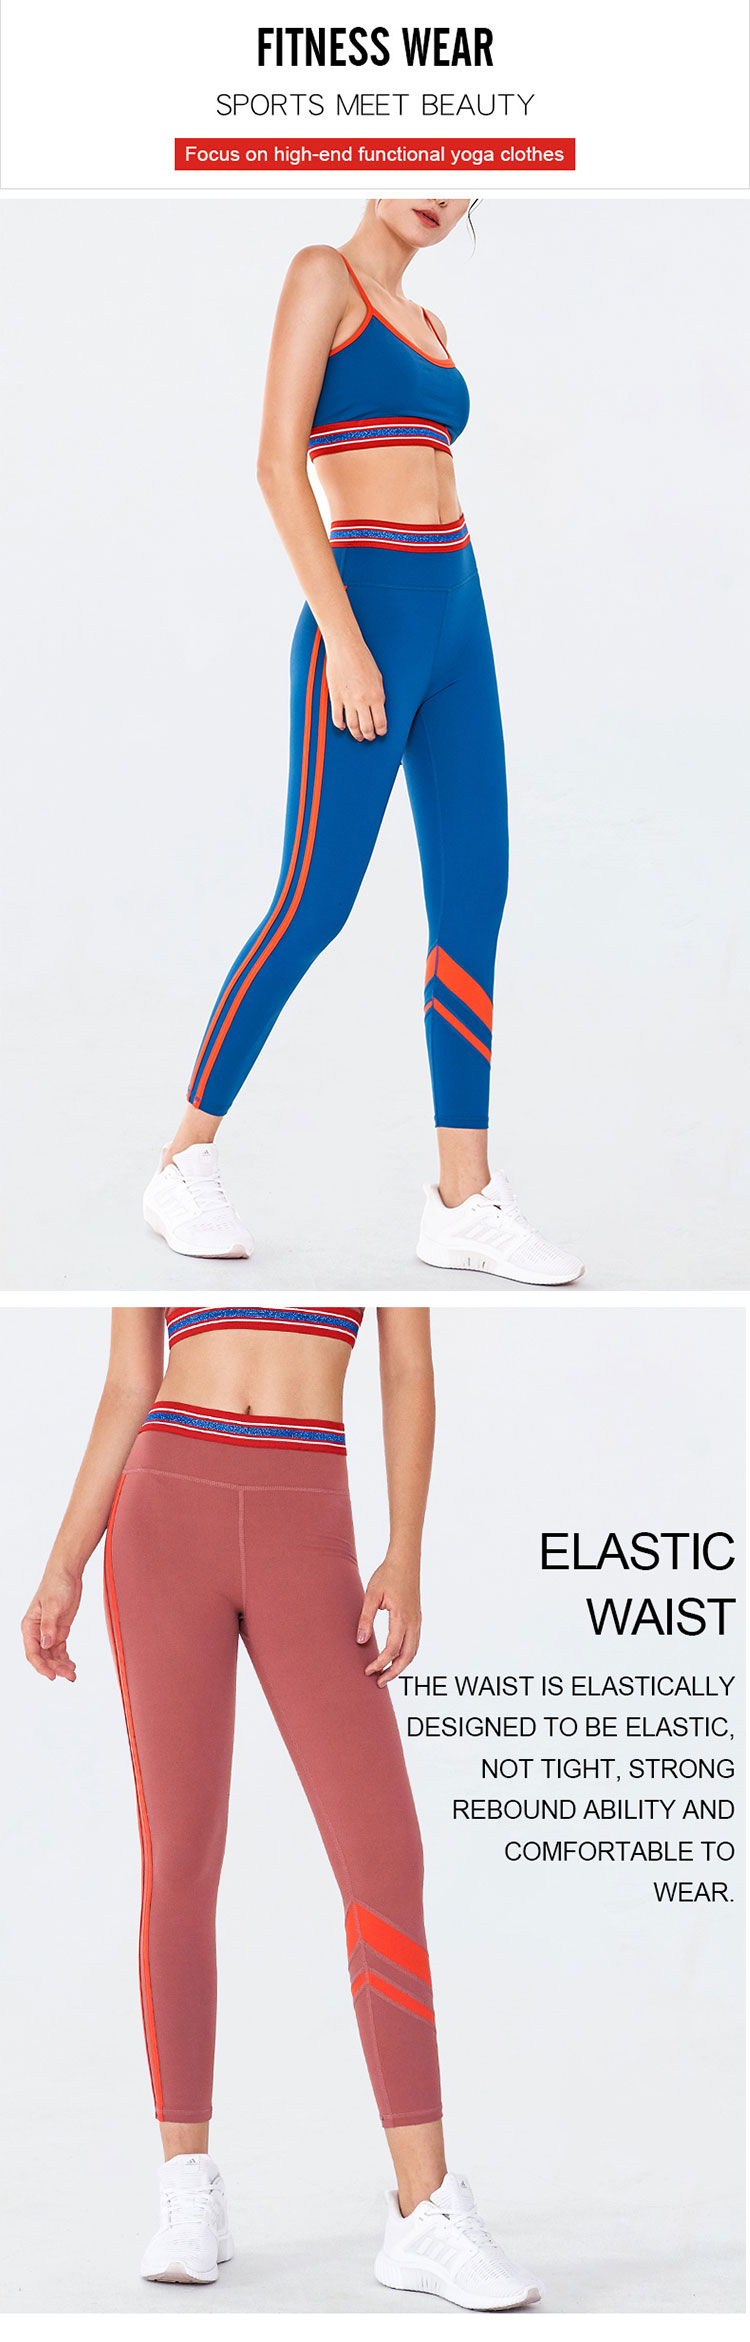 The-high-waisted-workout-tights-industry-is-paying-more-and-more-attention-on-environmental-protection